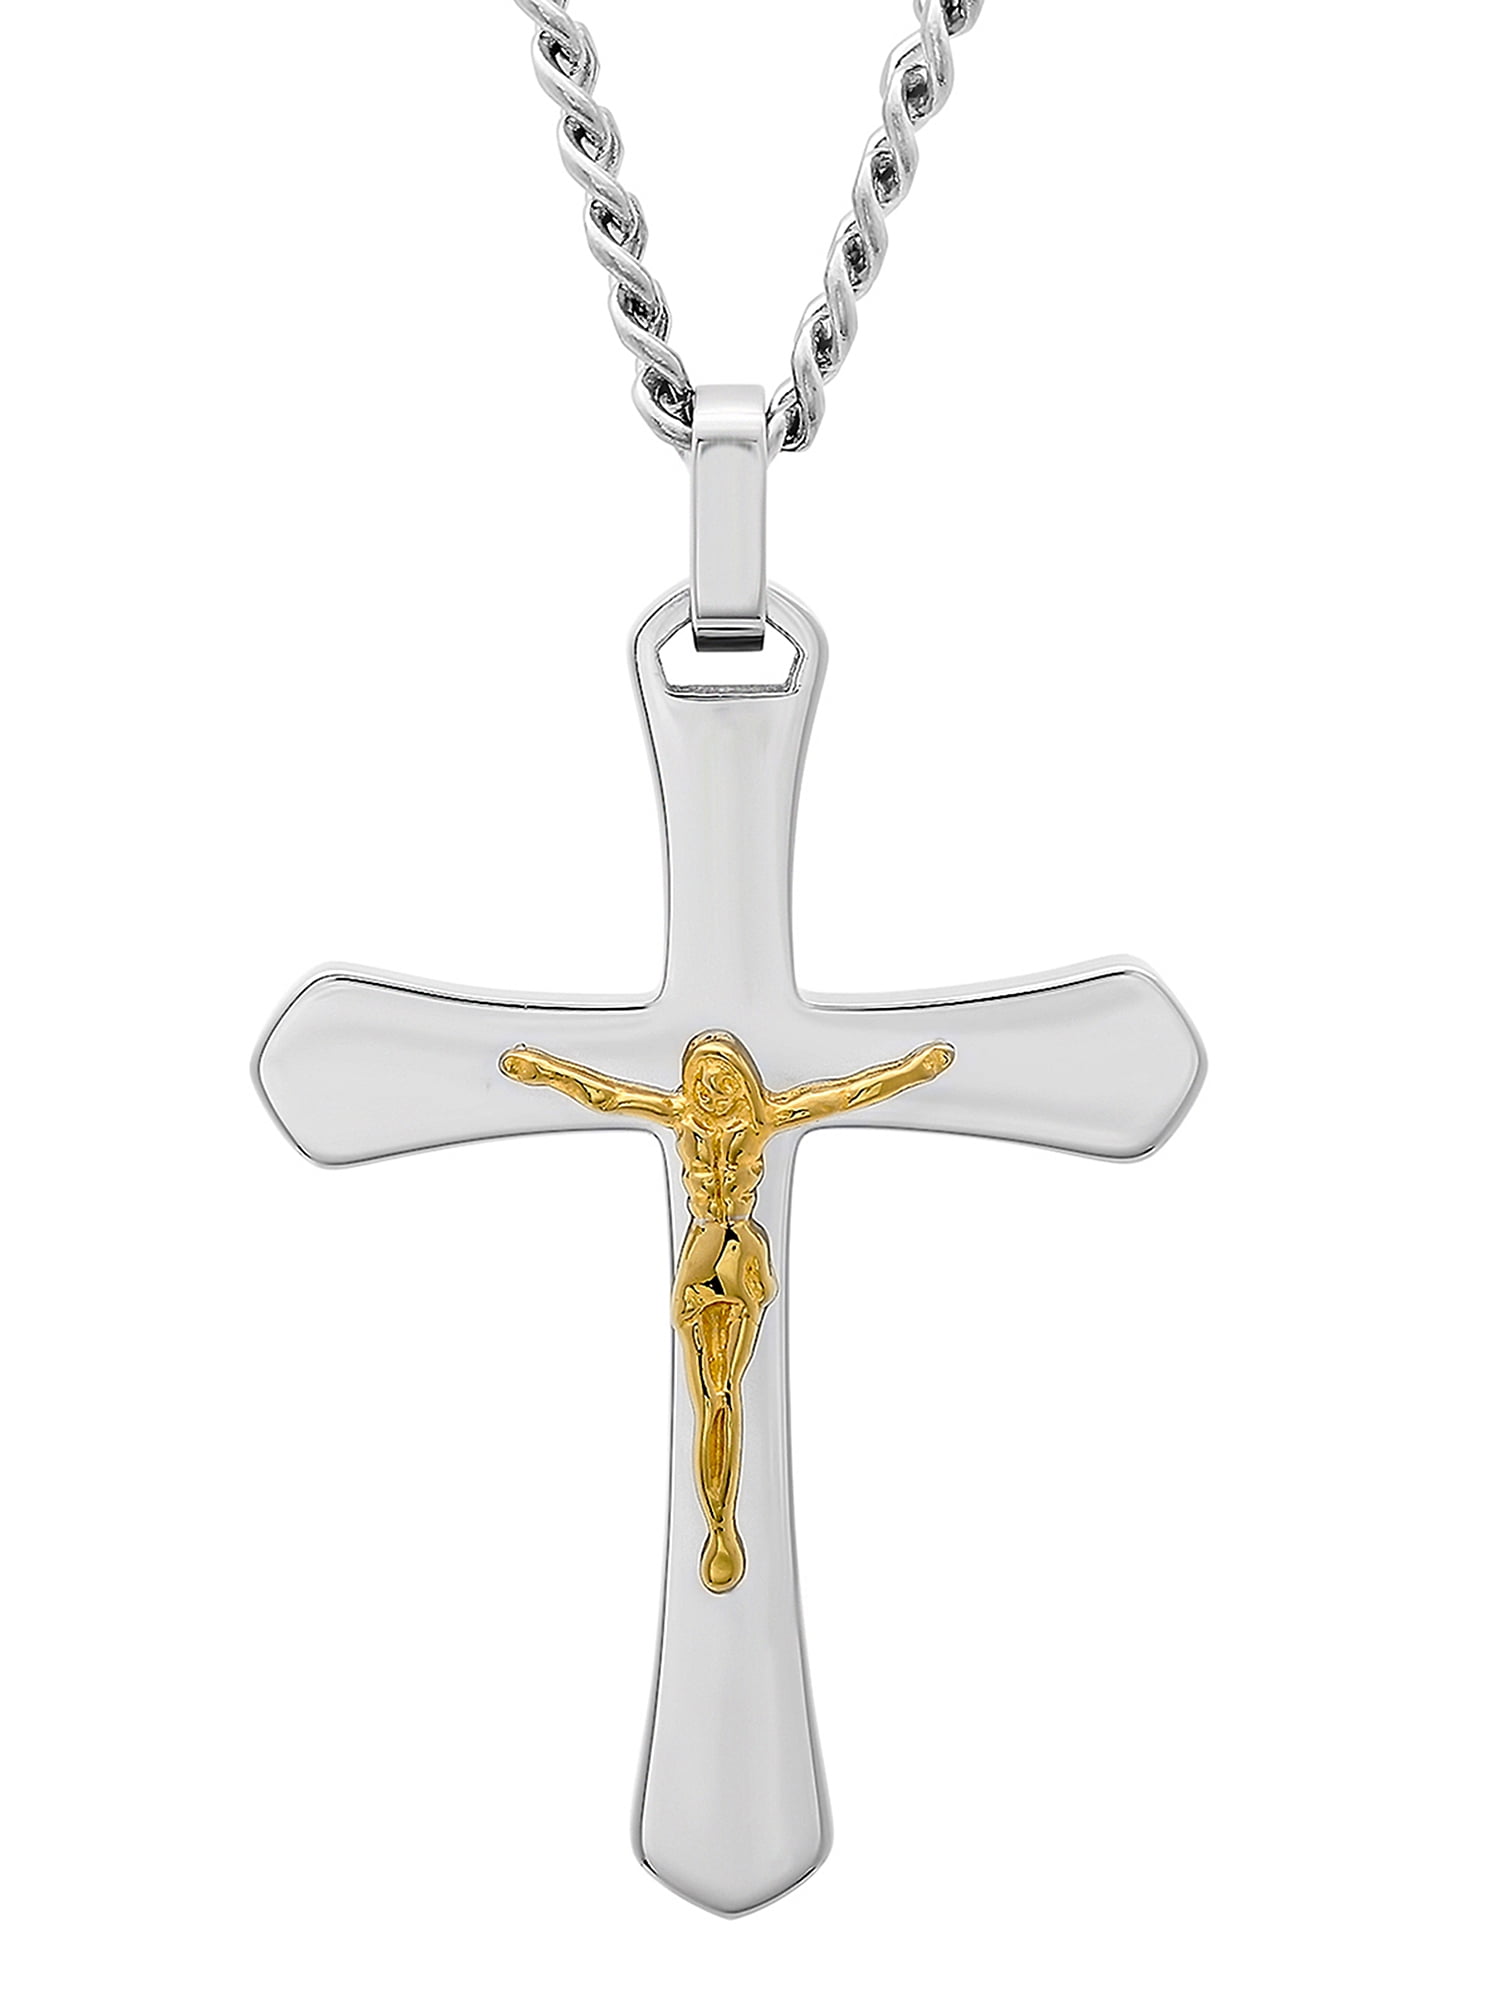 Silver color Crucifix Cross Charm for Bracelet or Necklace Jewelry 2 